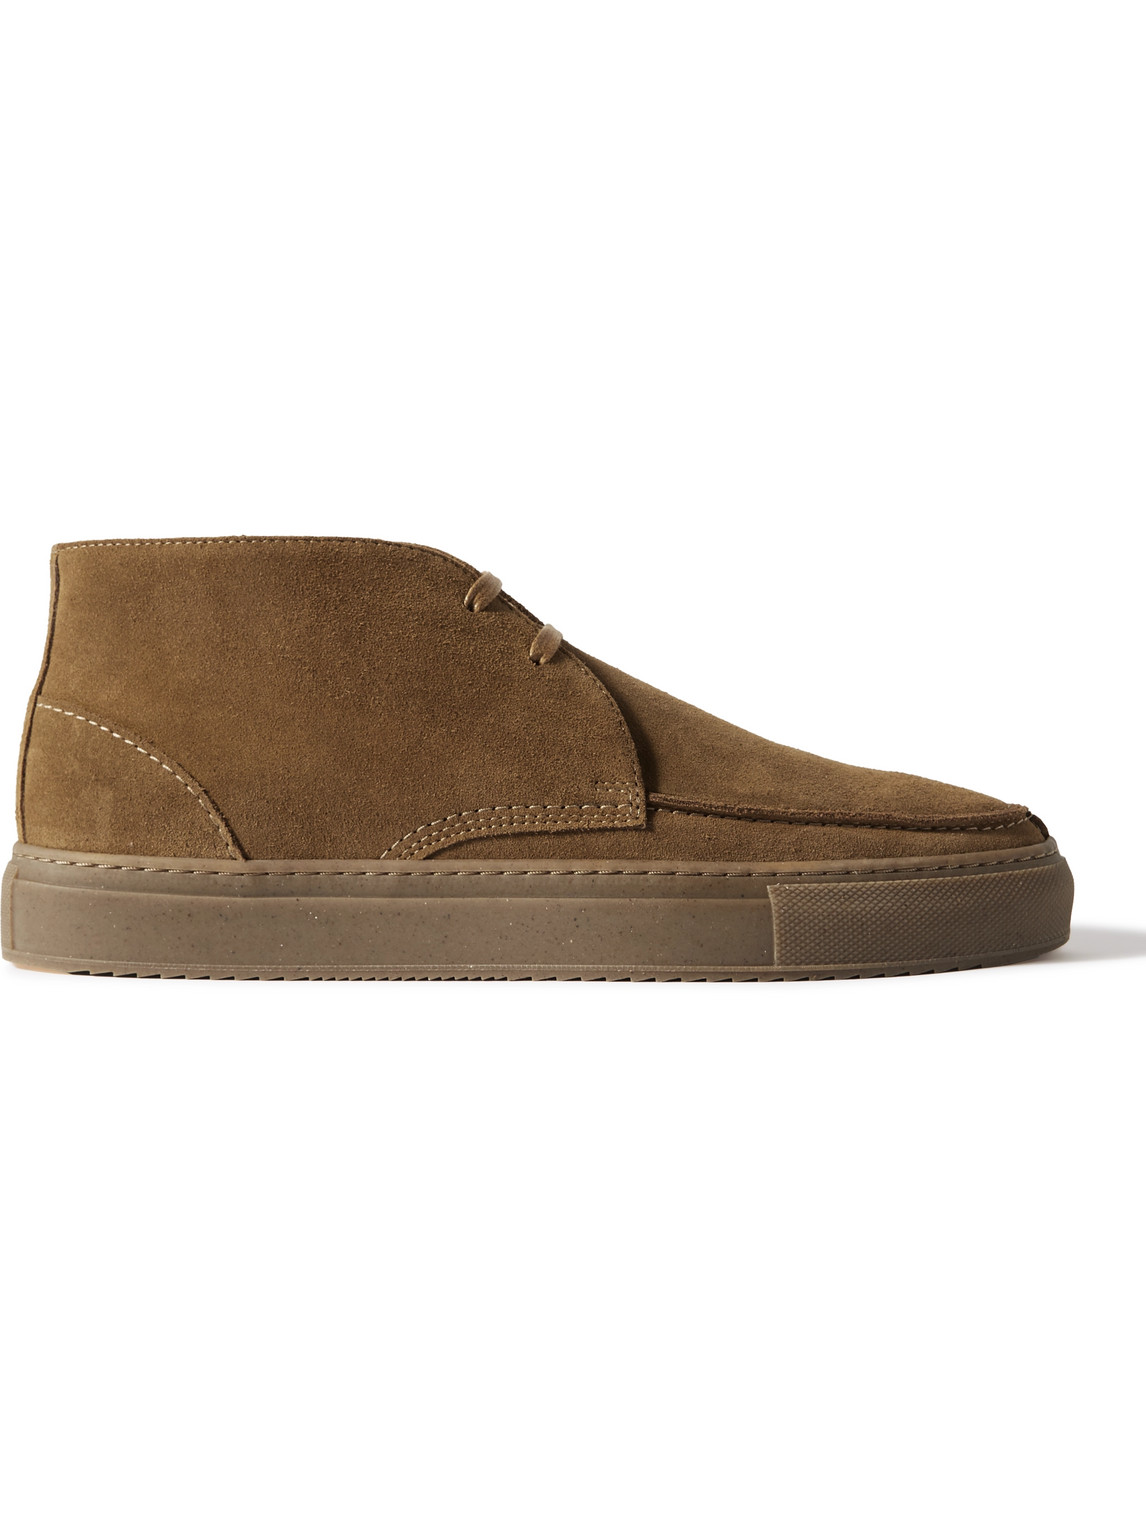 Larry Split-Toe Regenerated Suede by evolo® Chukka Boots